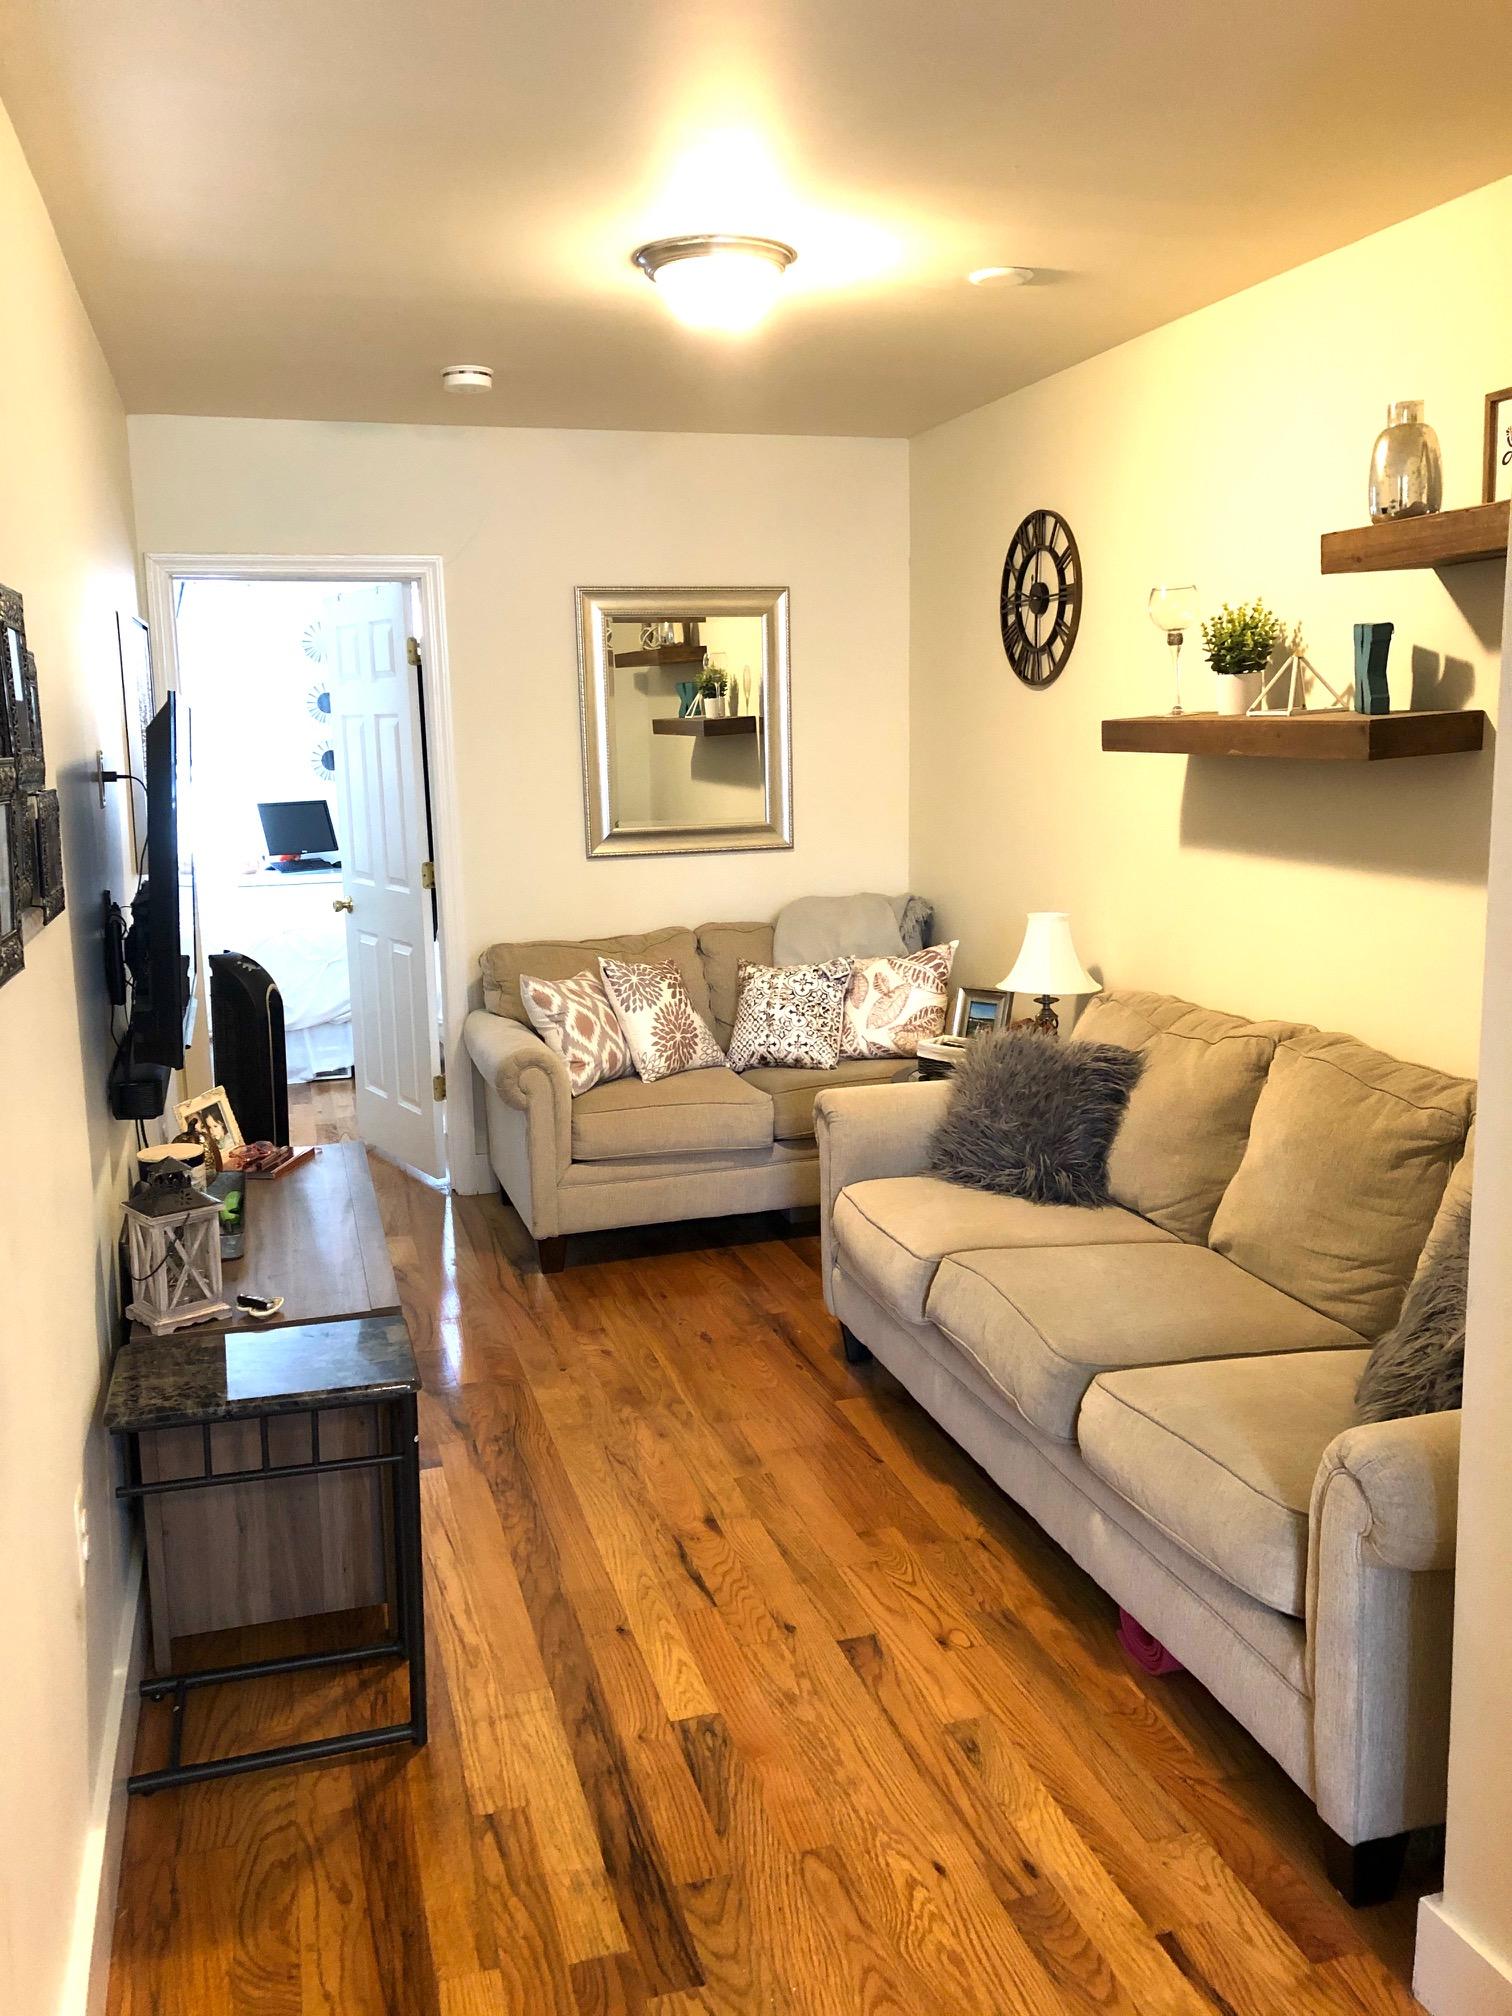 Centrally located 1 bedroom unit in Hoboken! Apartment features hardwood floors, spacious bedroom and a fantastic location! Don't miss this opportunity! Available 5/1. 1 month broker fee. NO PETS.